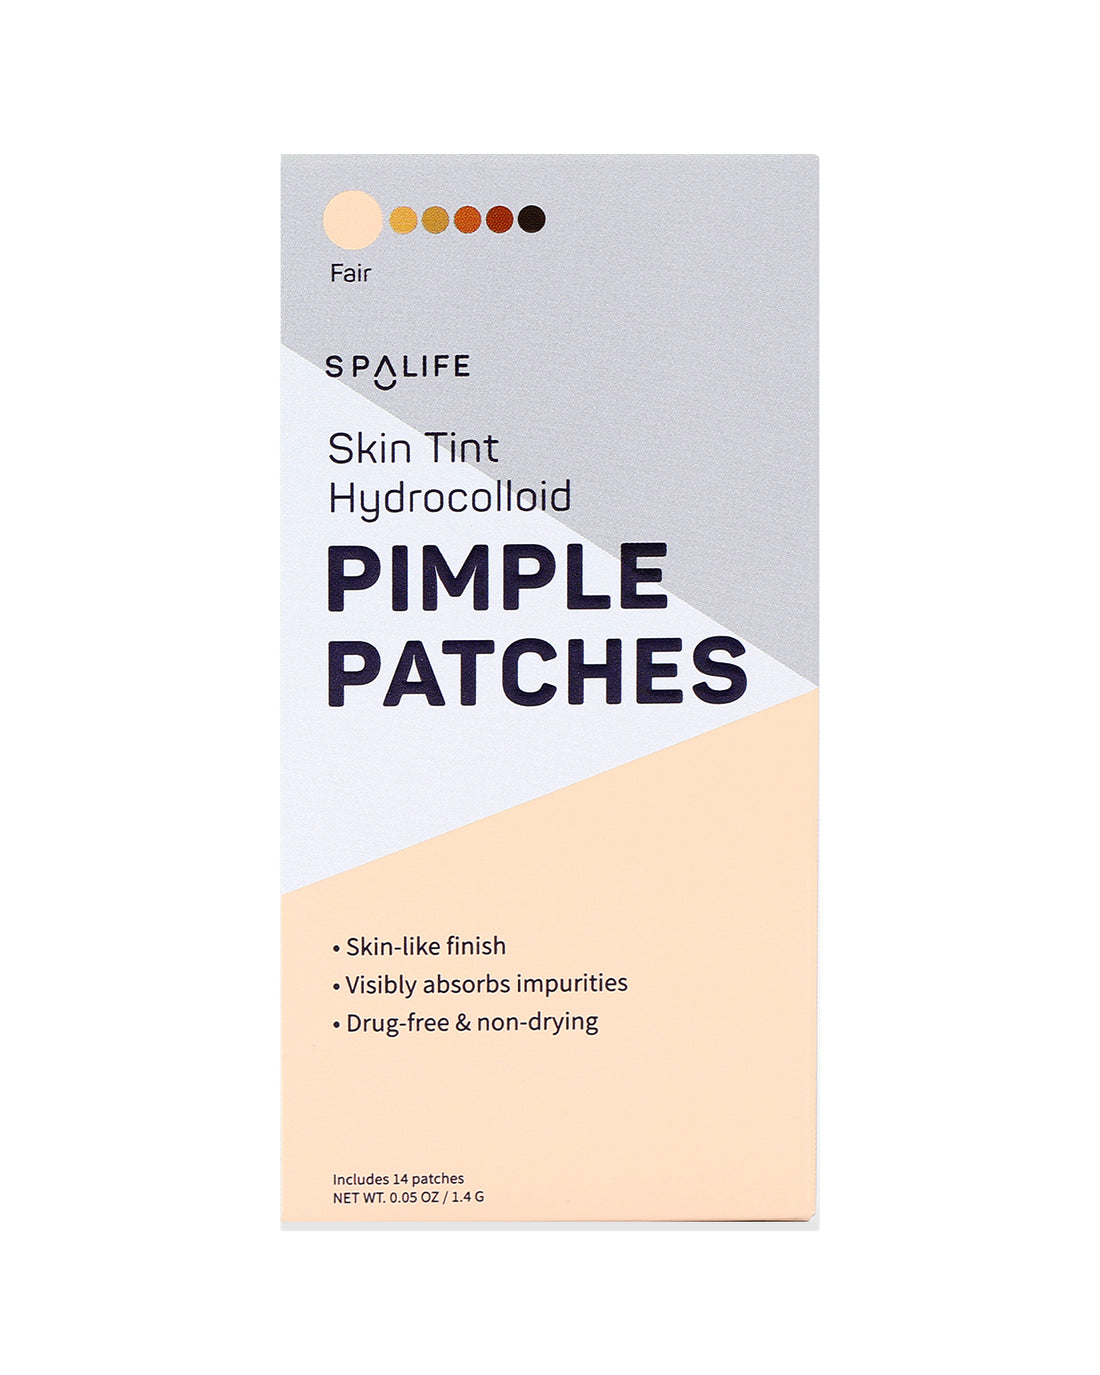 Skin_tint_pimple_patches_packe-503